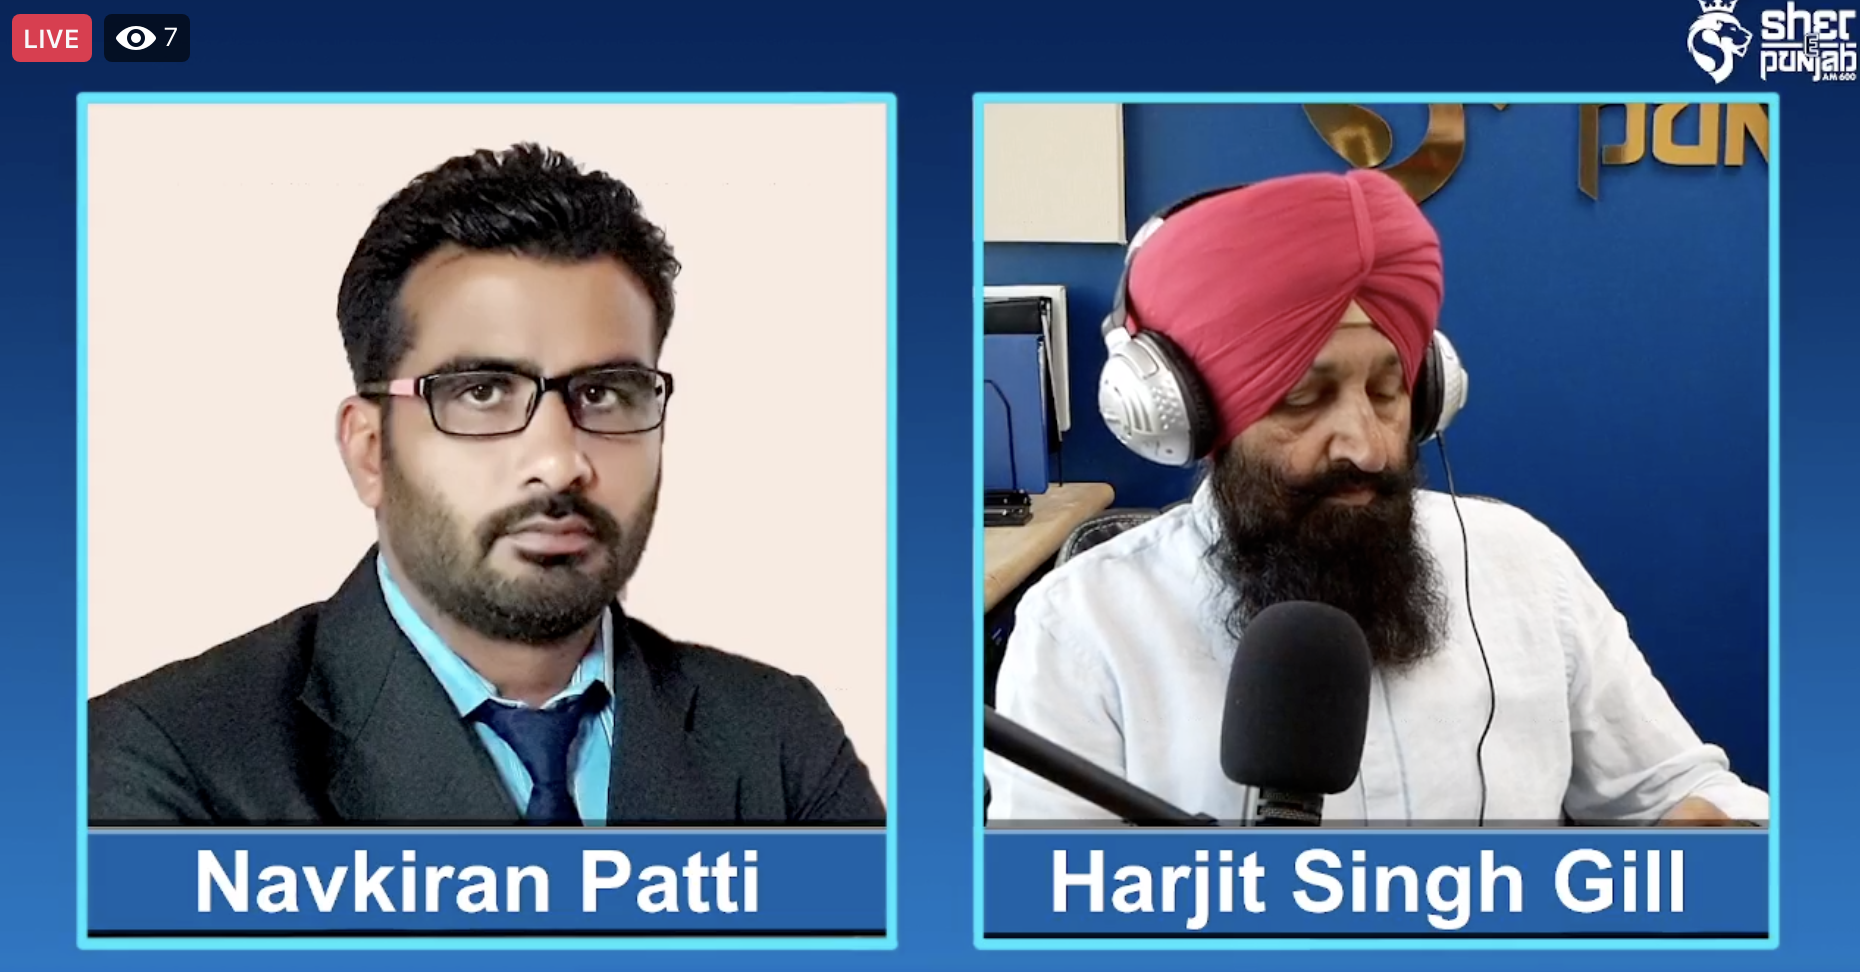 Live: The Harjit Singh Gill SHOW